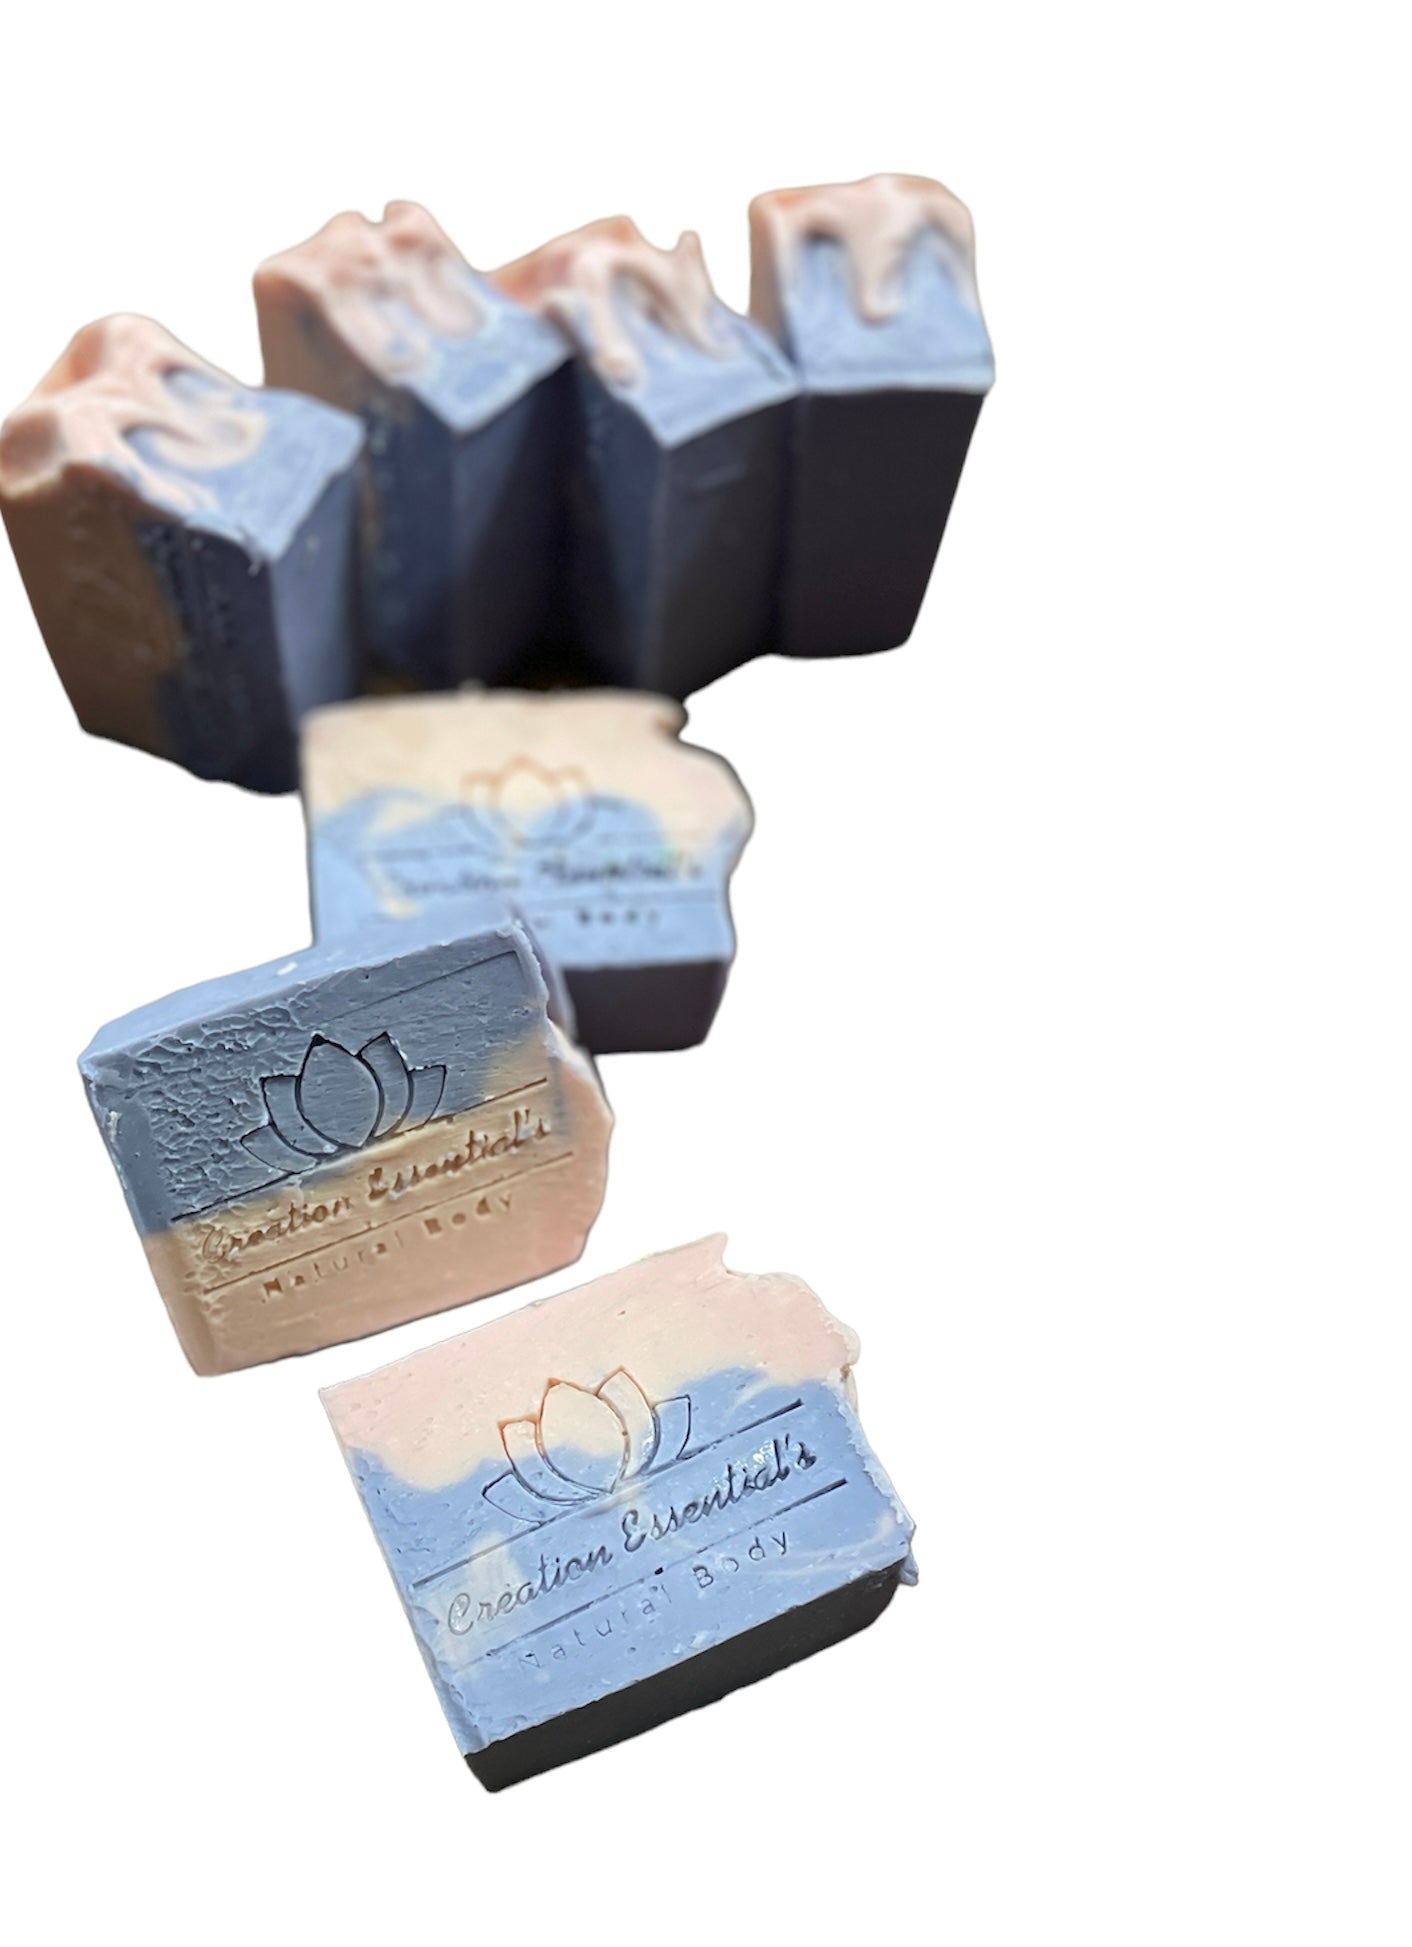 Luxurious and Rejuvenating Blooming Goats Milk Soap Bar